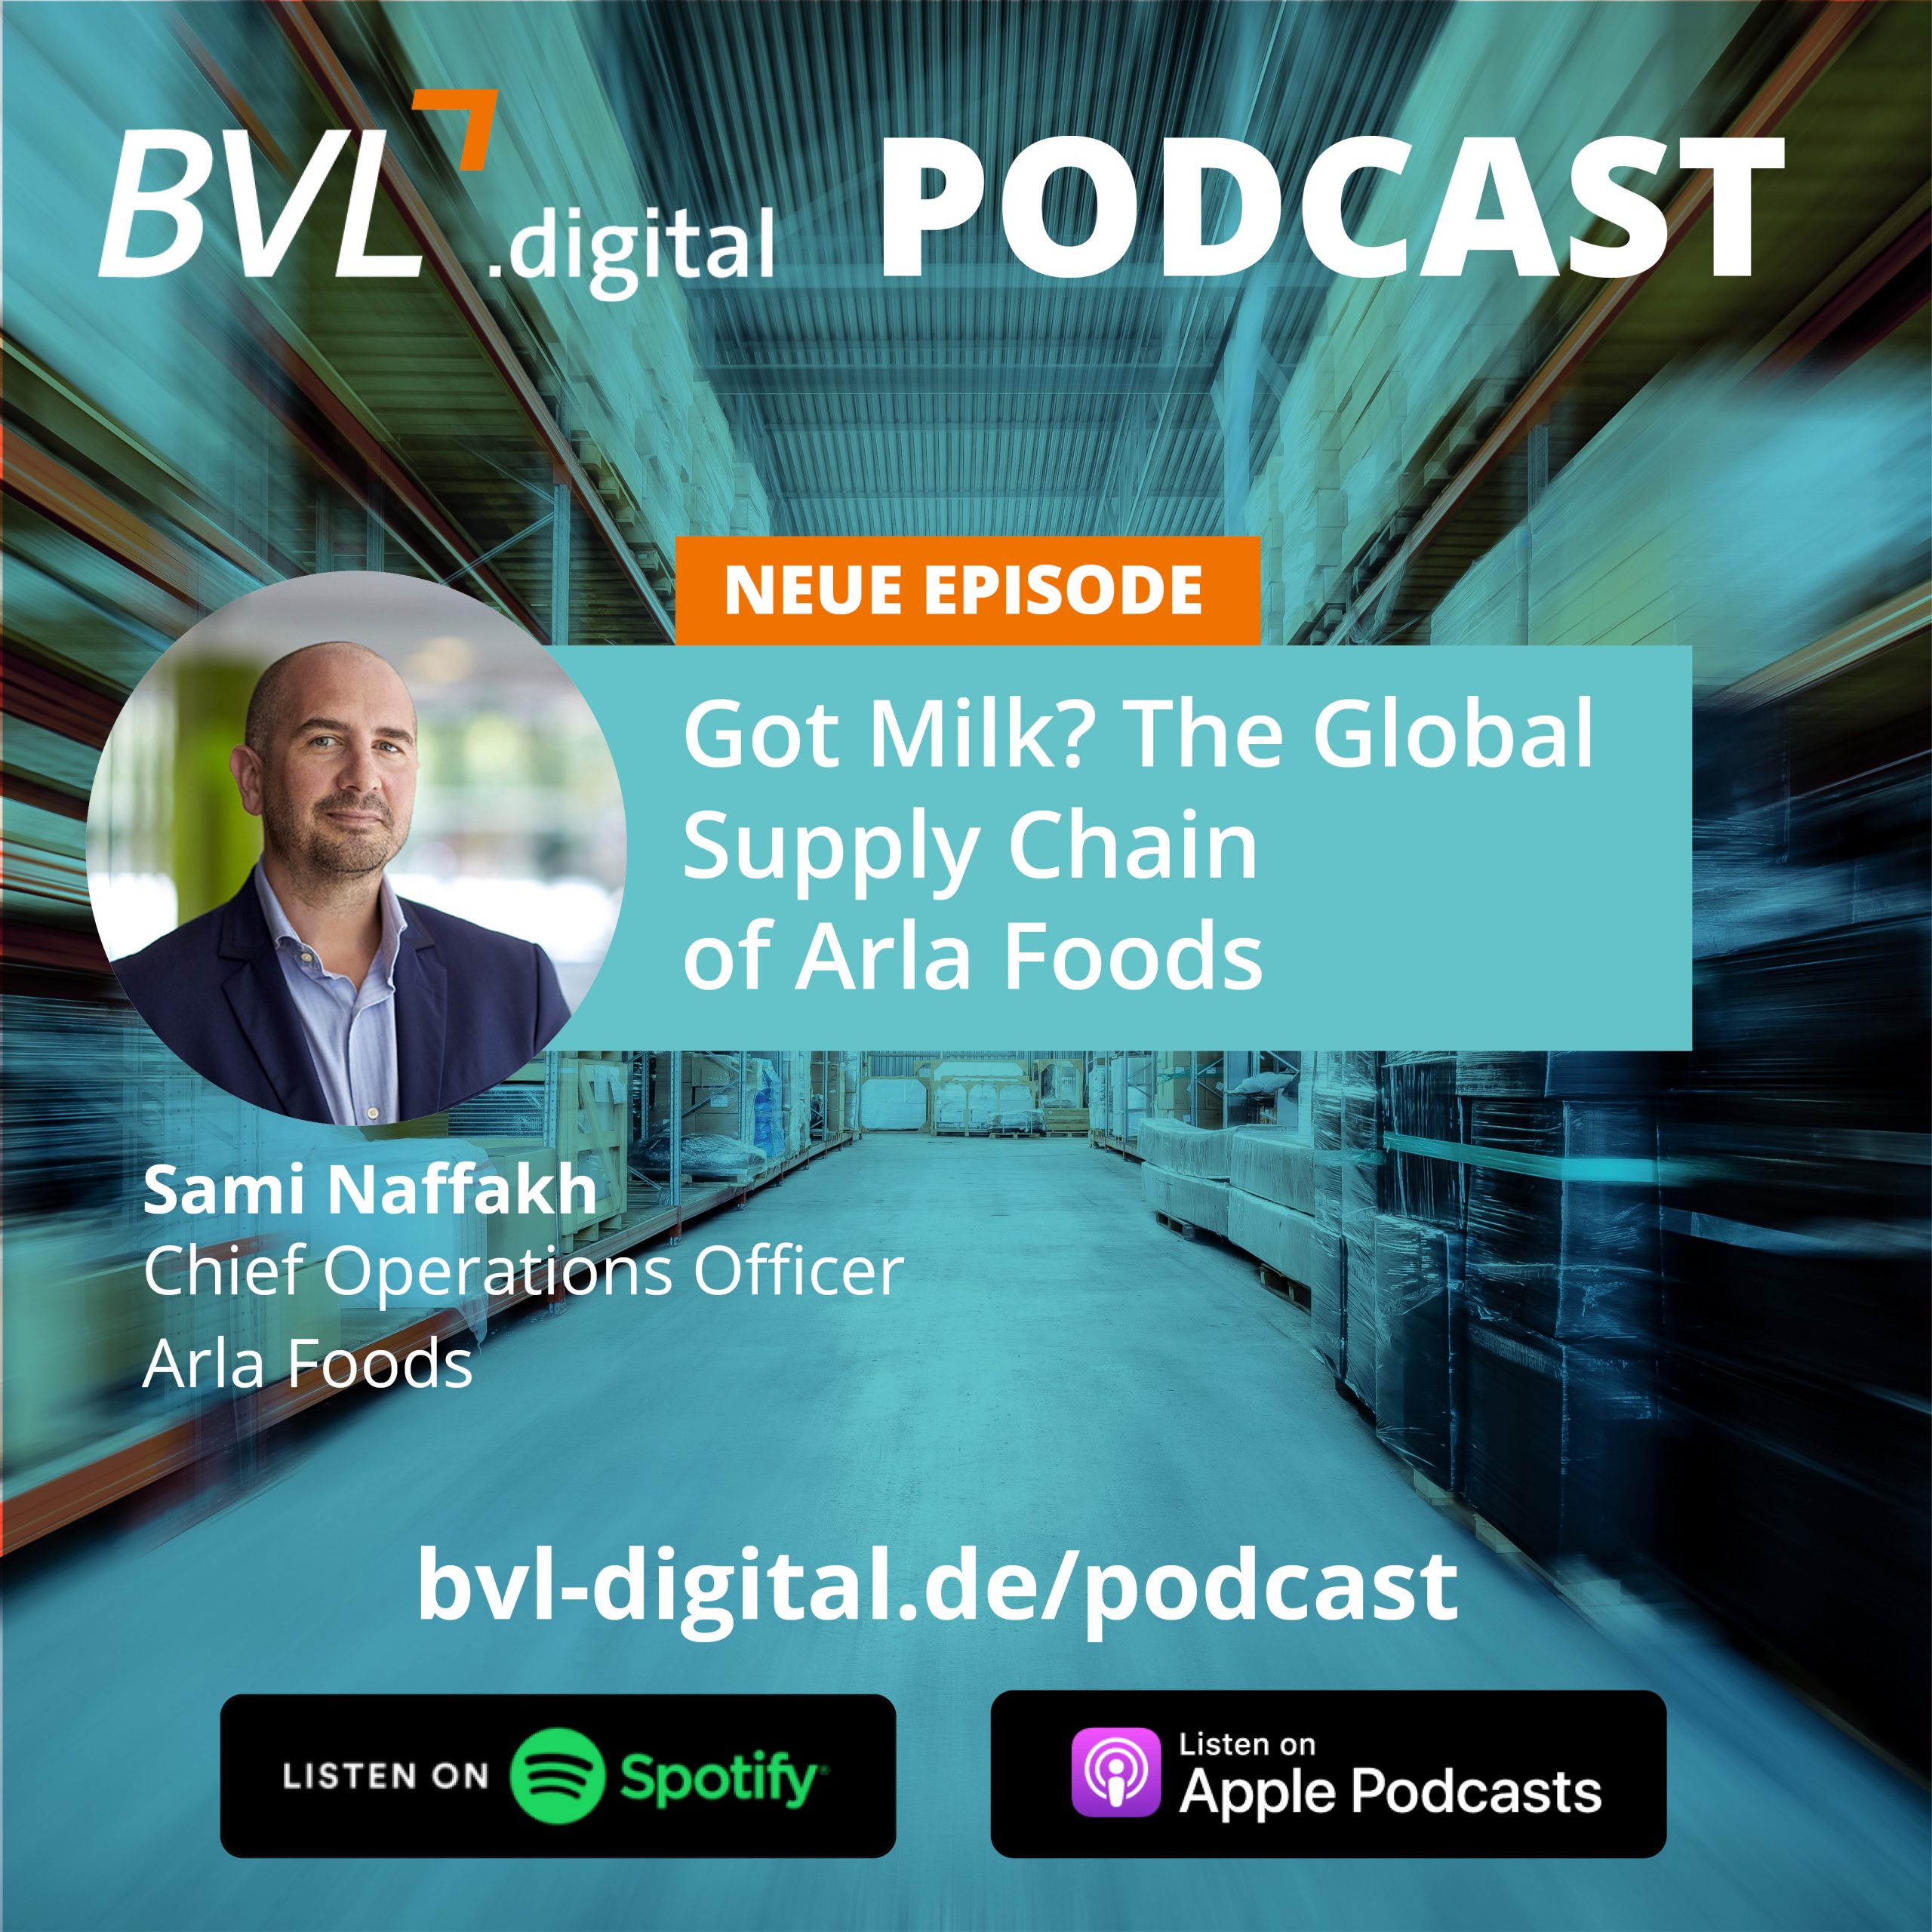 #5: Got Milk? The Global Supply Chain of Arla Foods with COO Sami Naffakh